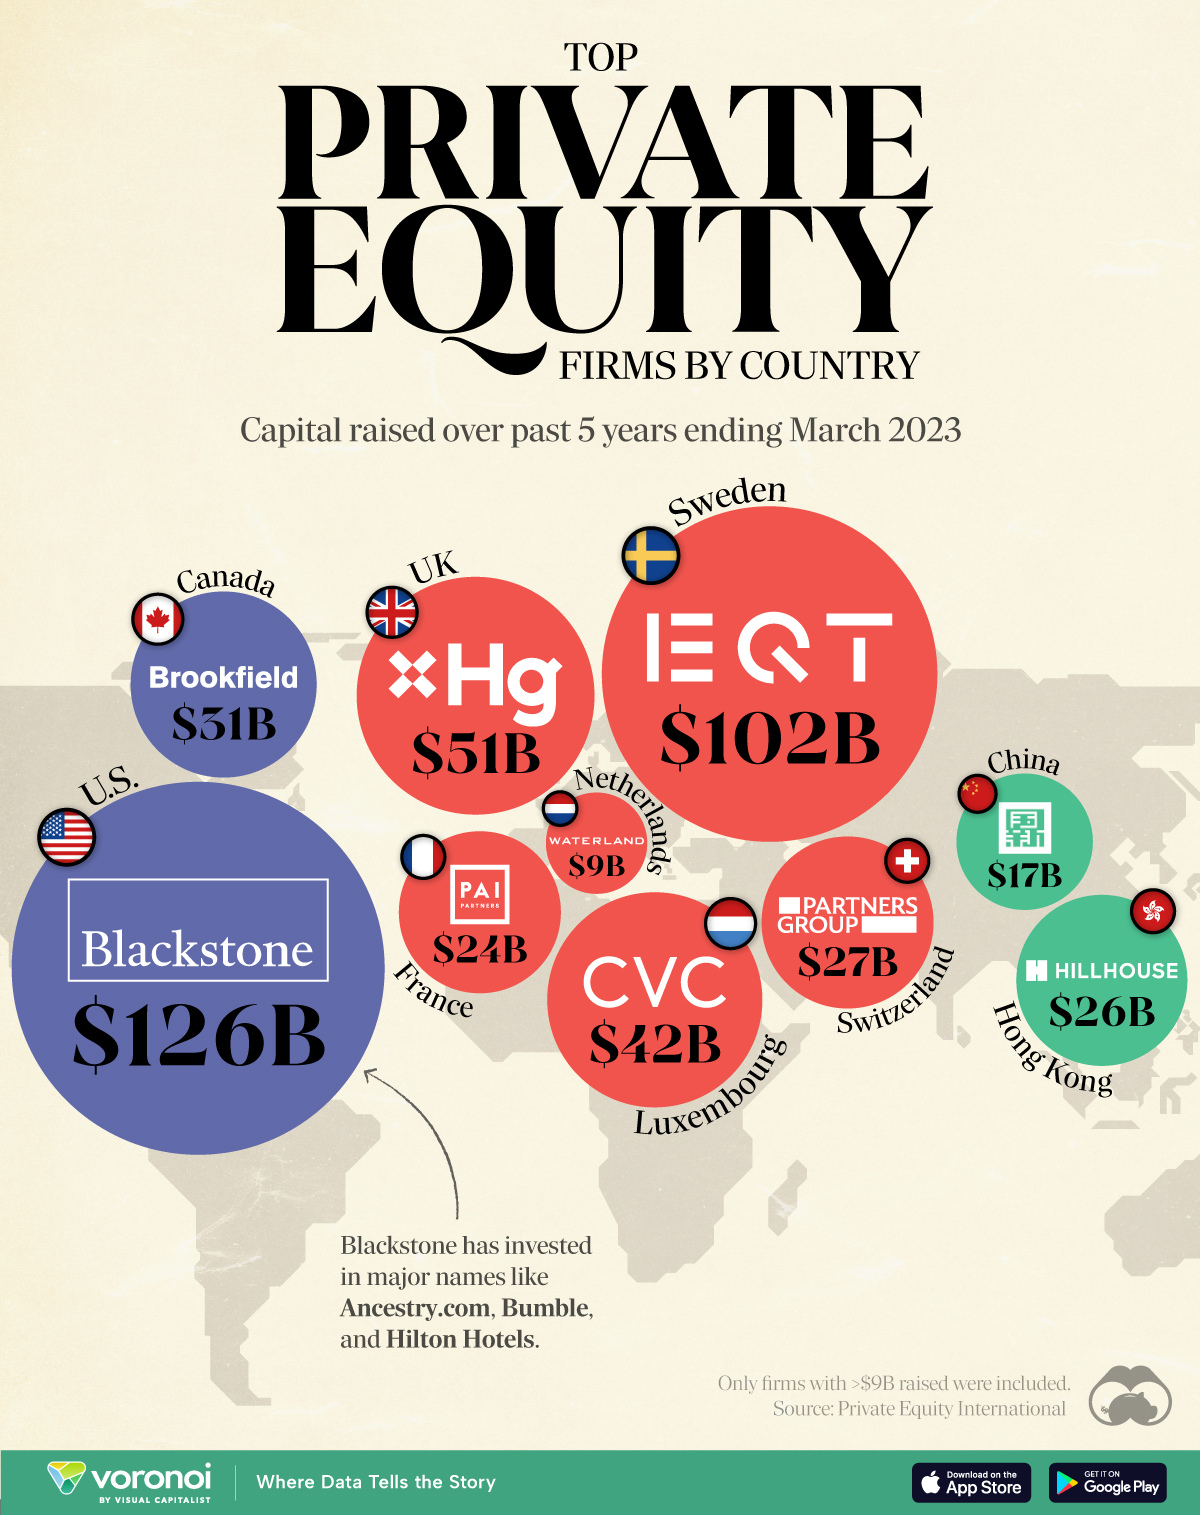 The Top Private Equity Firms by Country : US Pioneer Global VC DIFCHQ NYC India Singapore – Riyadh Norway Our Mind